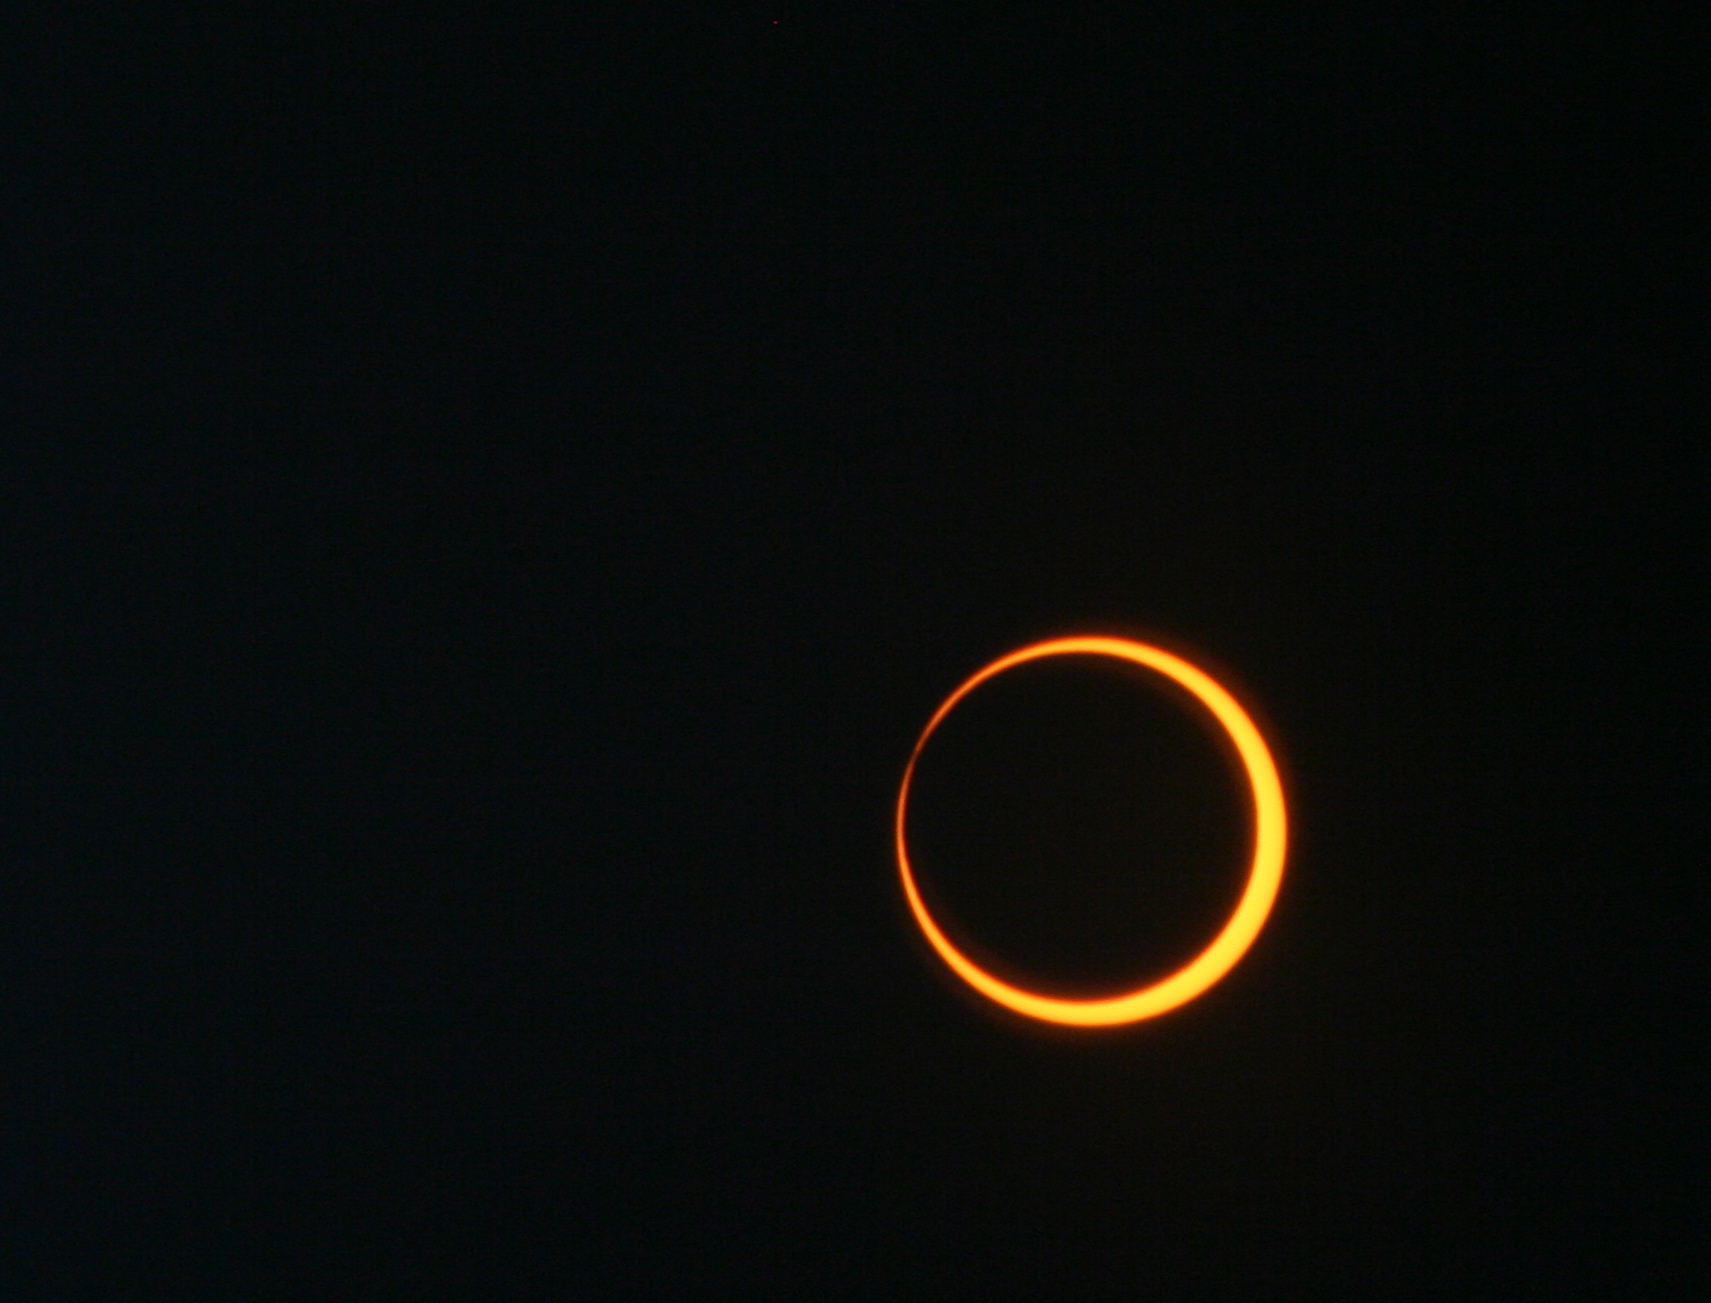 An annular eclipse, shown as an orange ring against a black background